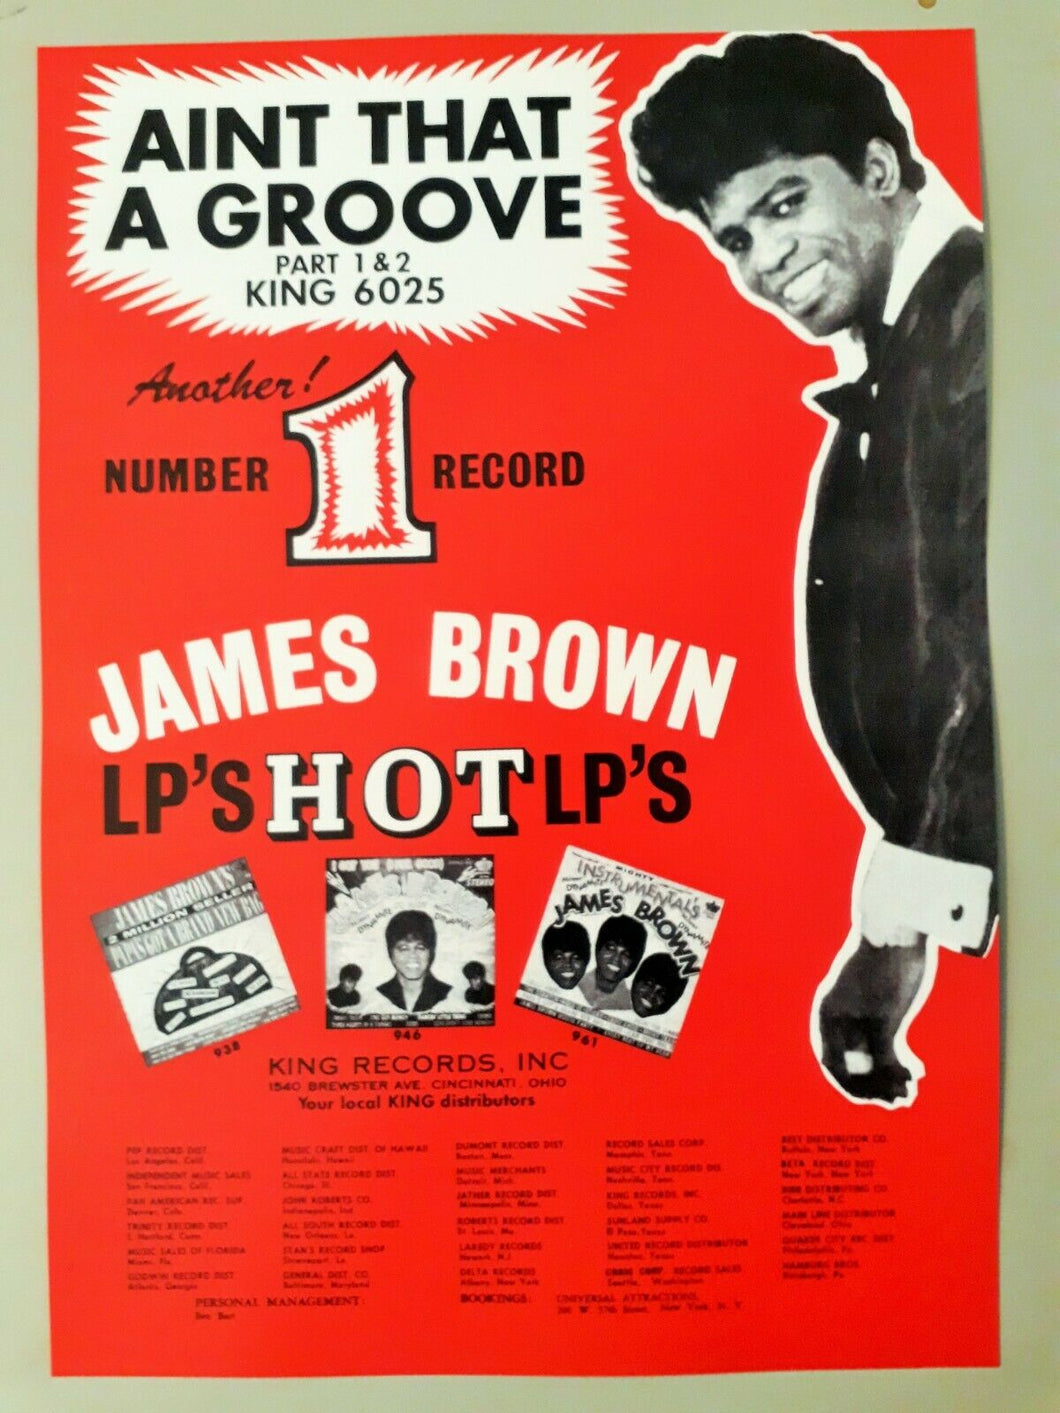 James Brown promo poster - Ain`t that a Groove advert 1965 new reprinted edition - Original Music and Movie Posters for sale from Bamalama - Online Poster Store UK London